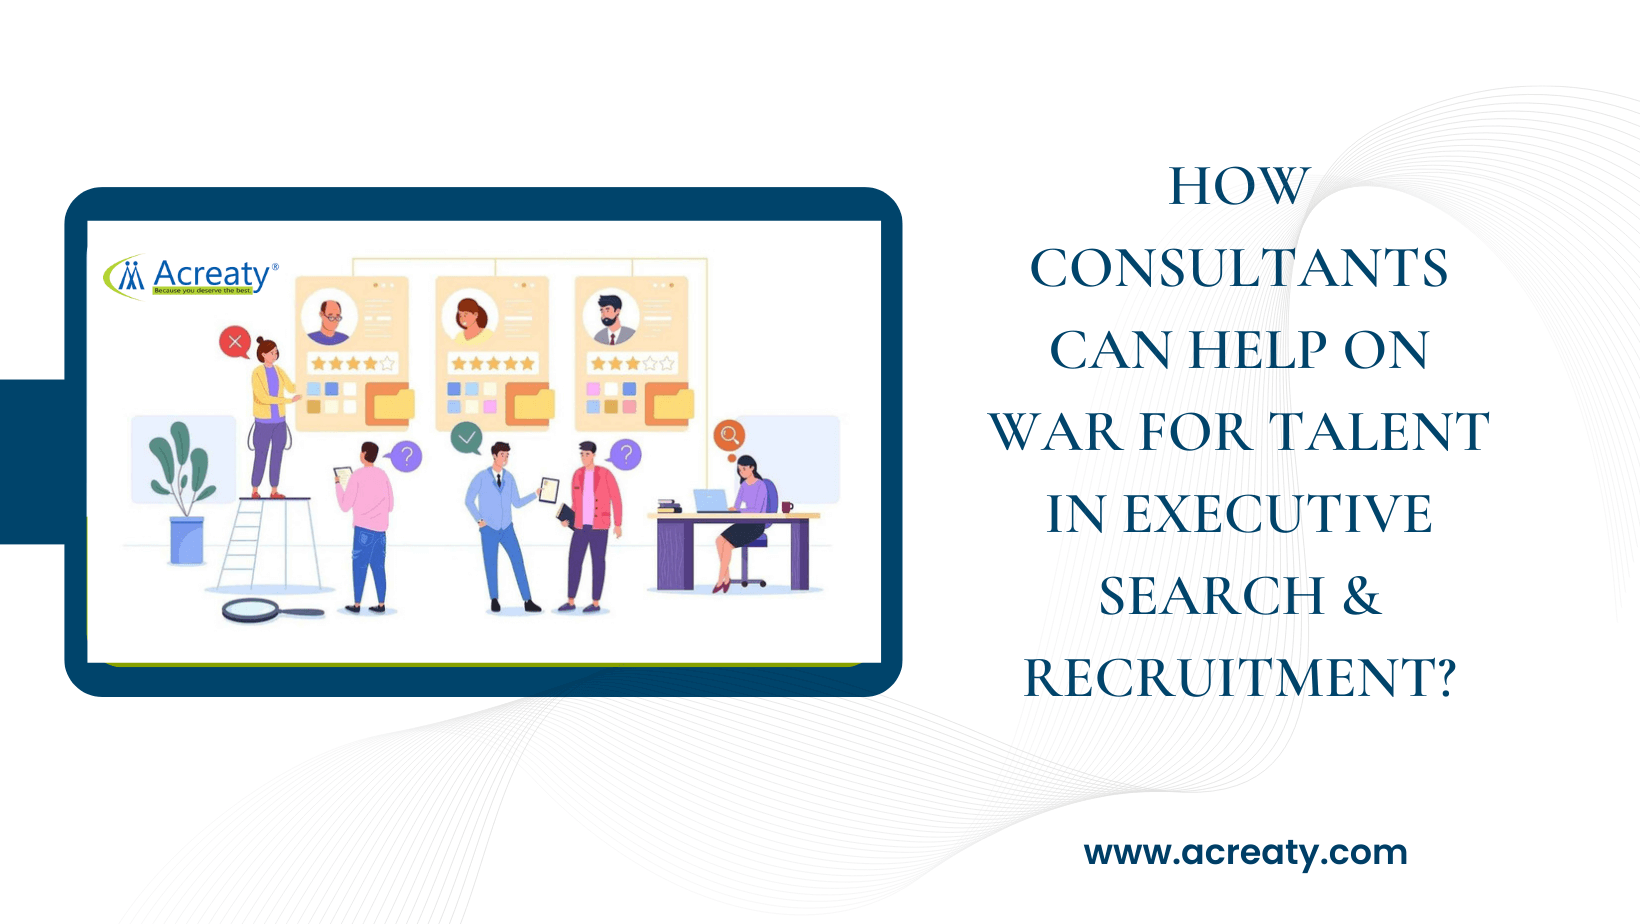 How consultants can help on War for talent in Executive Search & Recruitment?